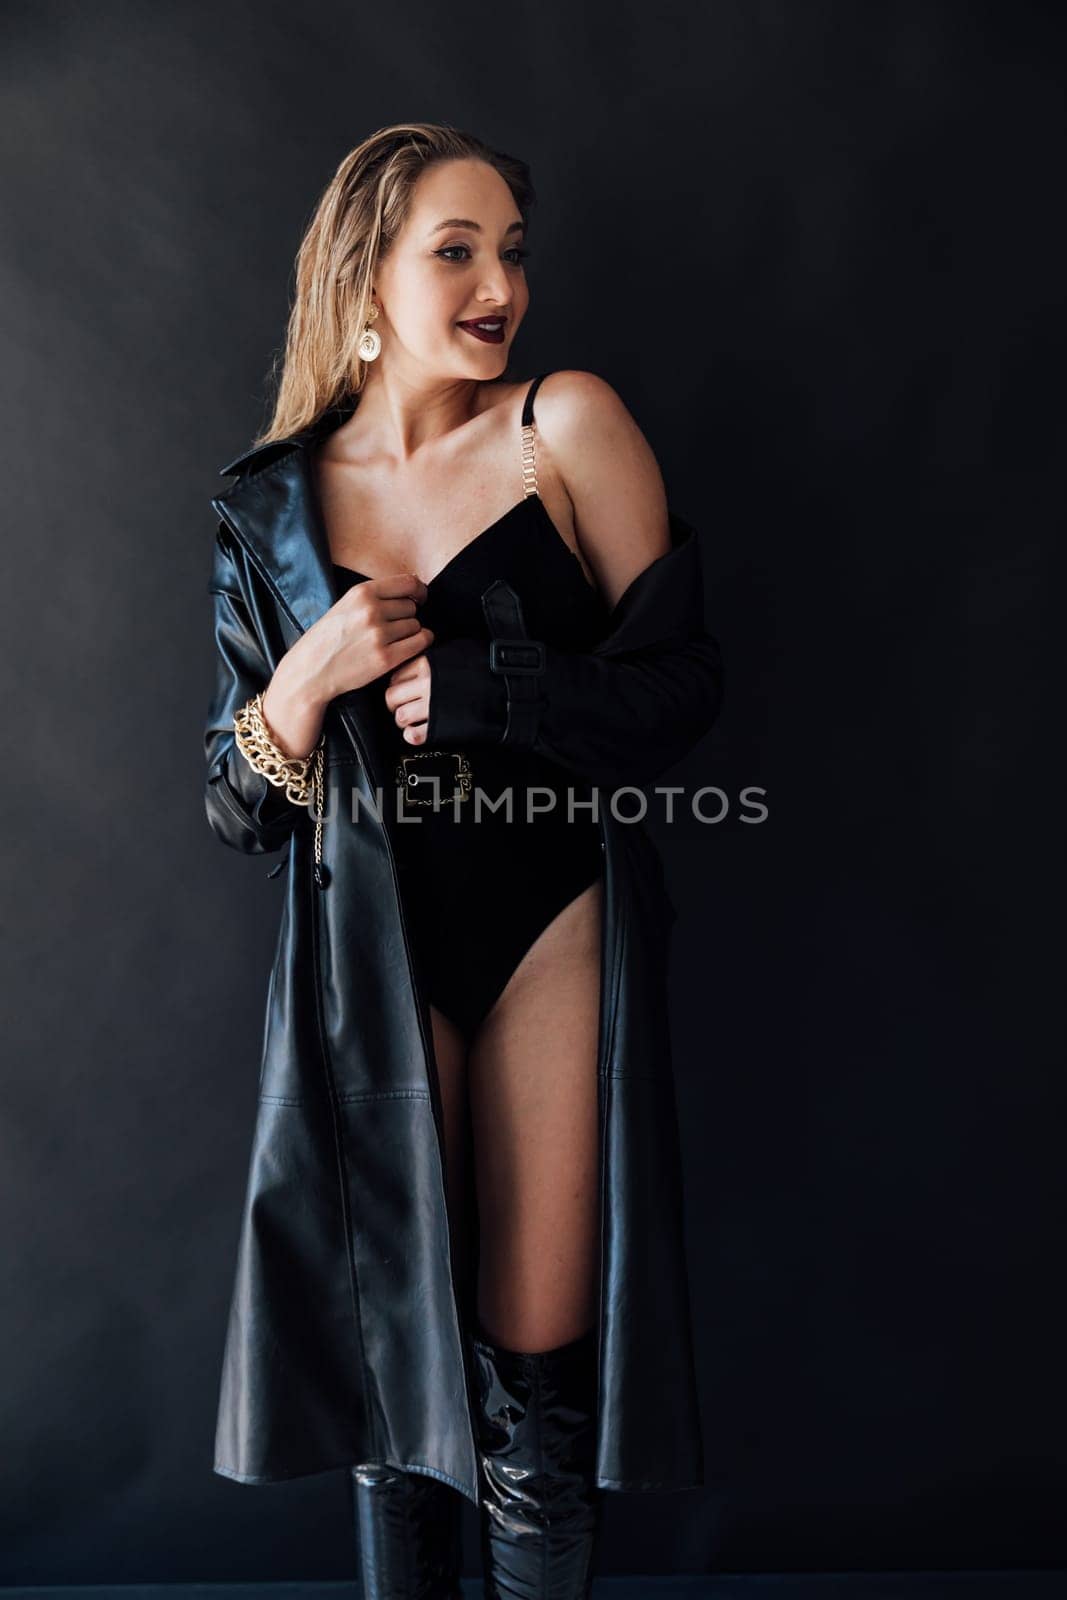 a femme fatale in black clothes poses on a black background in a dark room